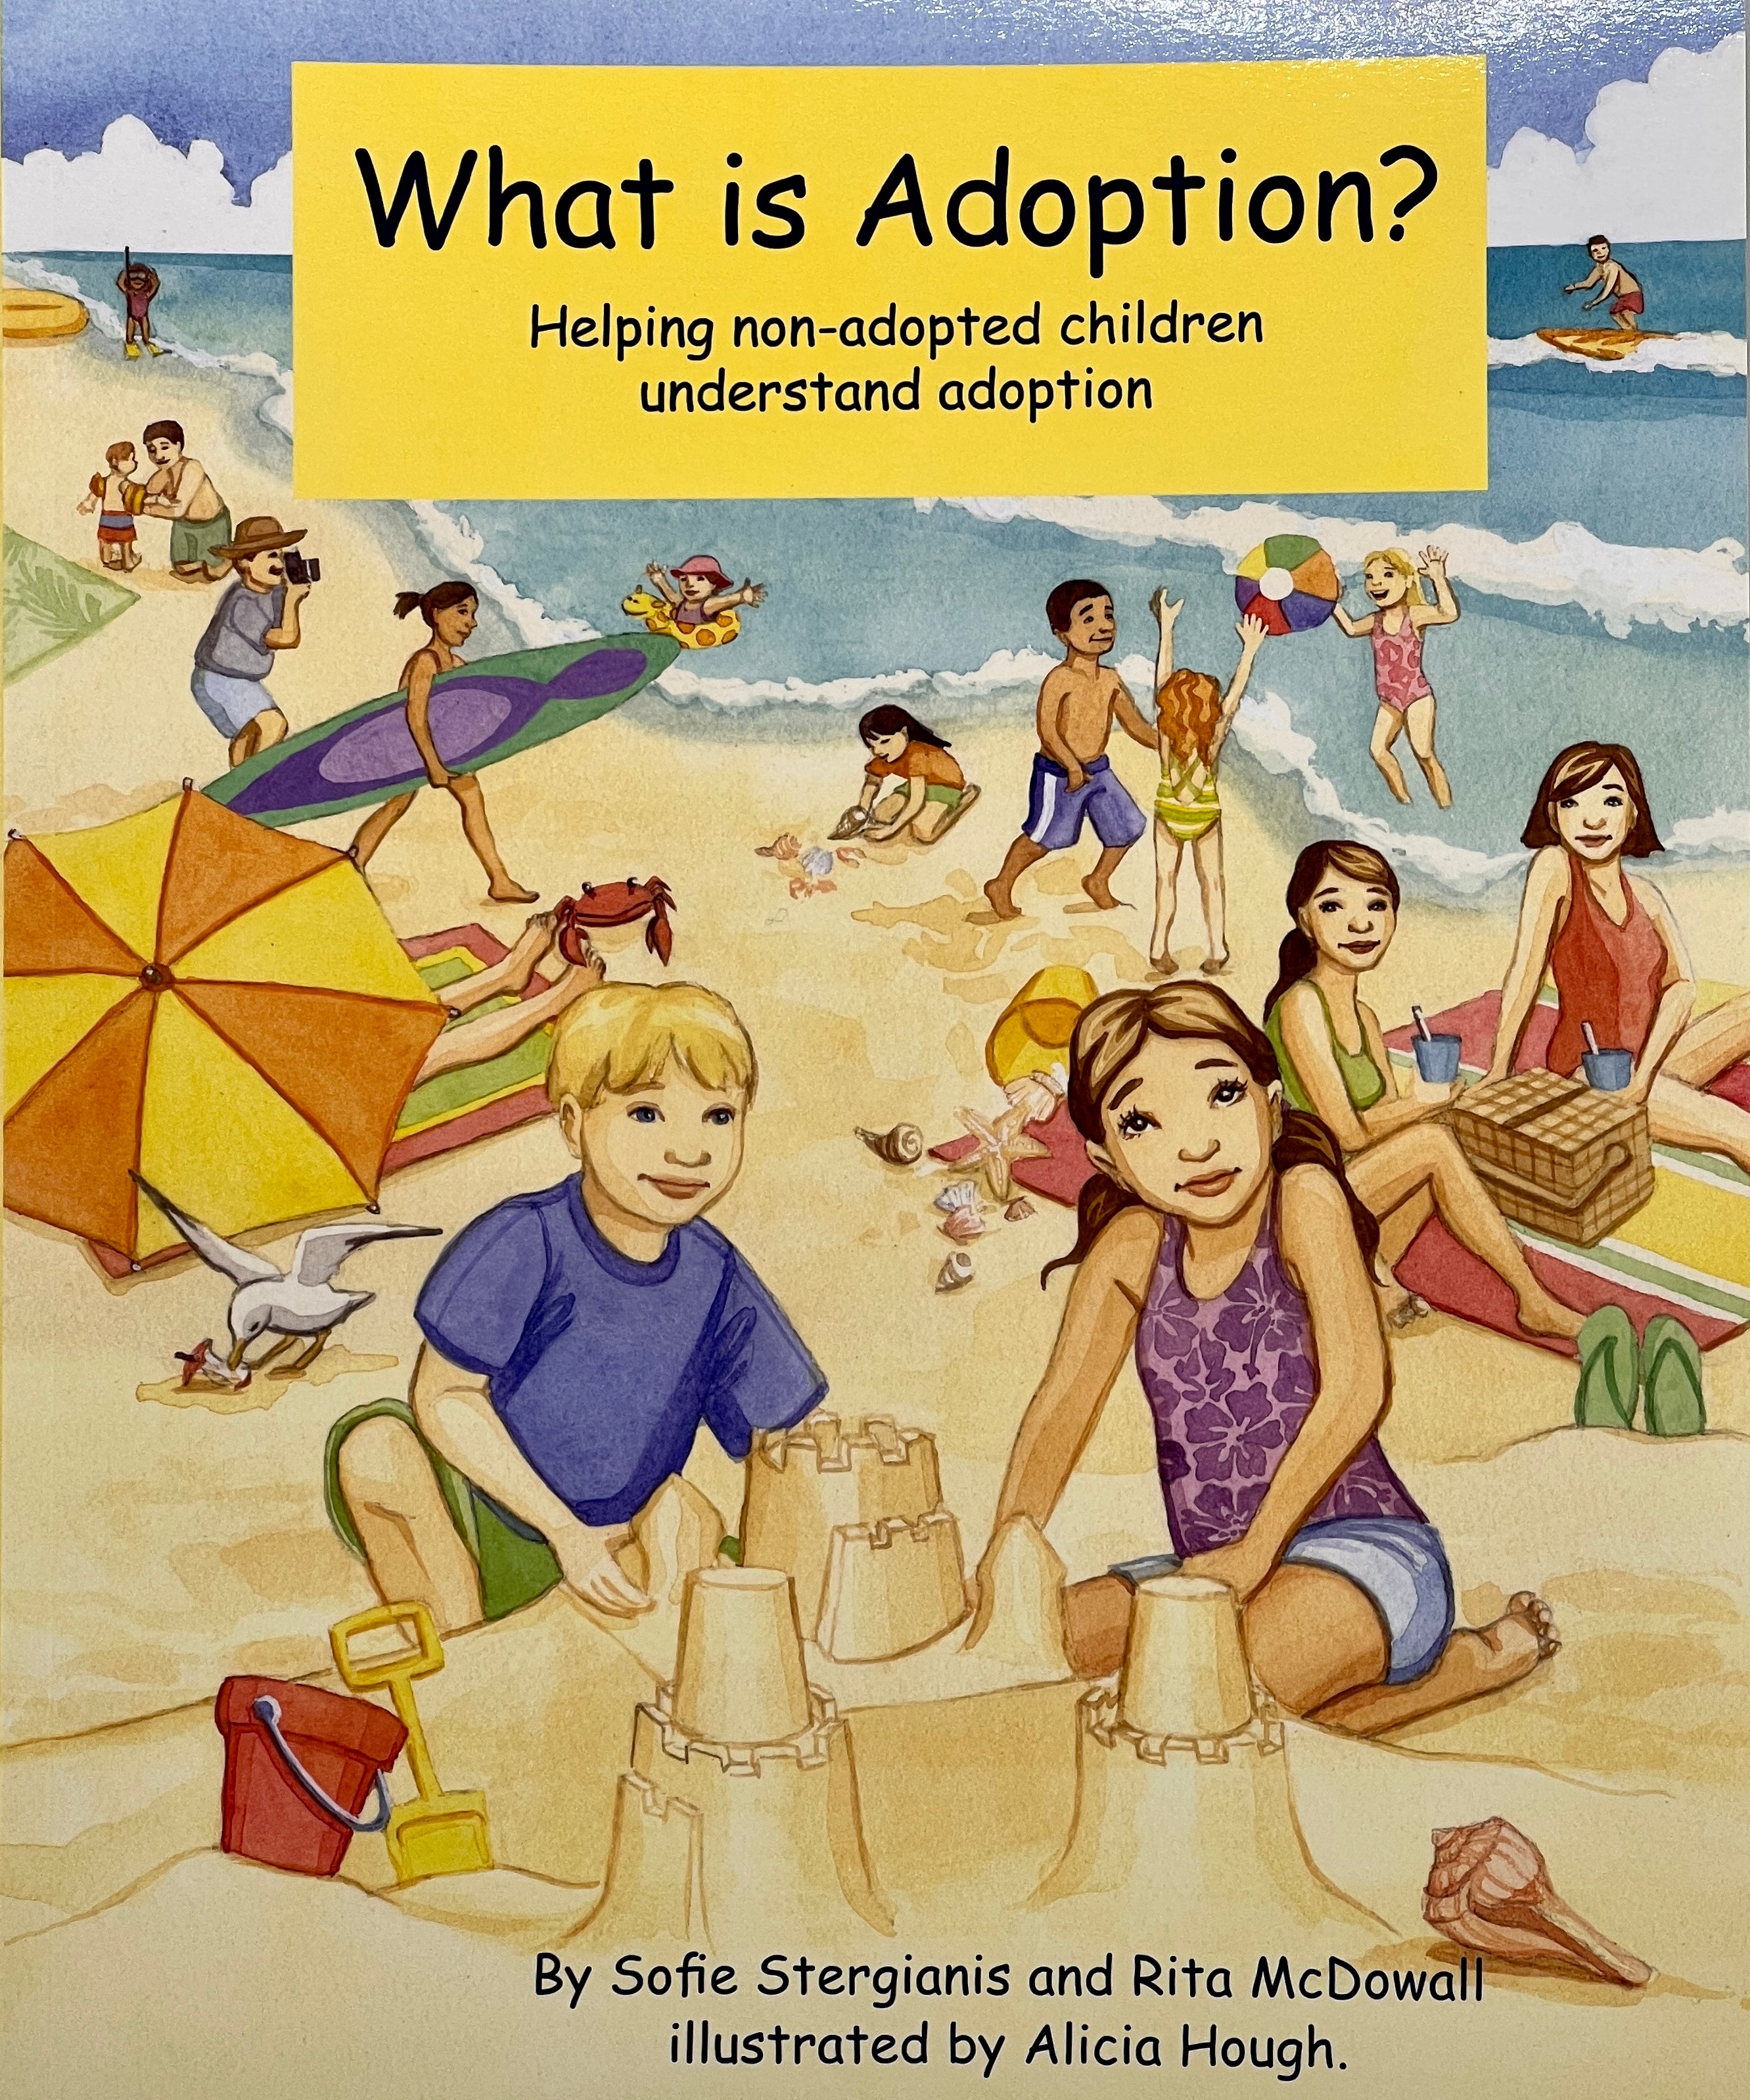 What is adoption